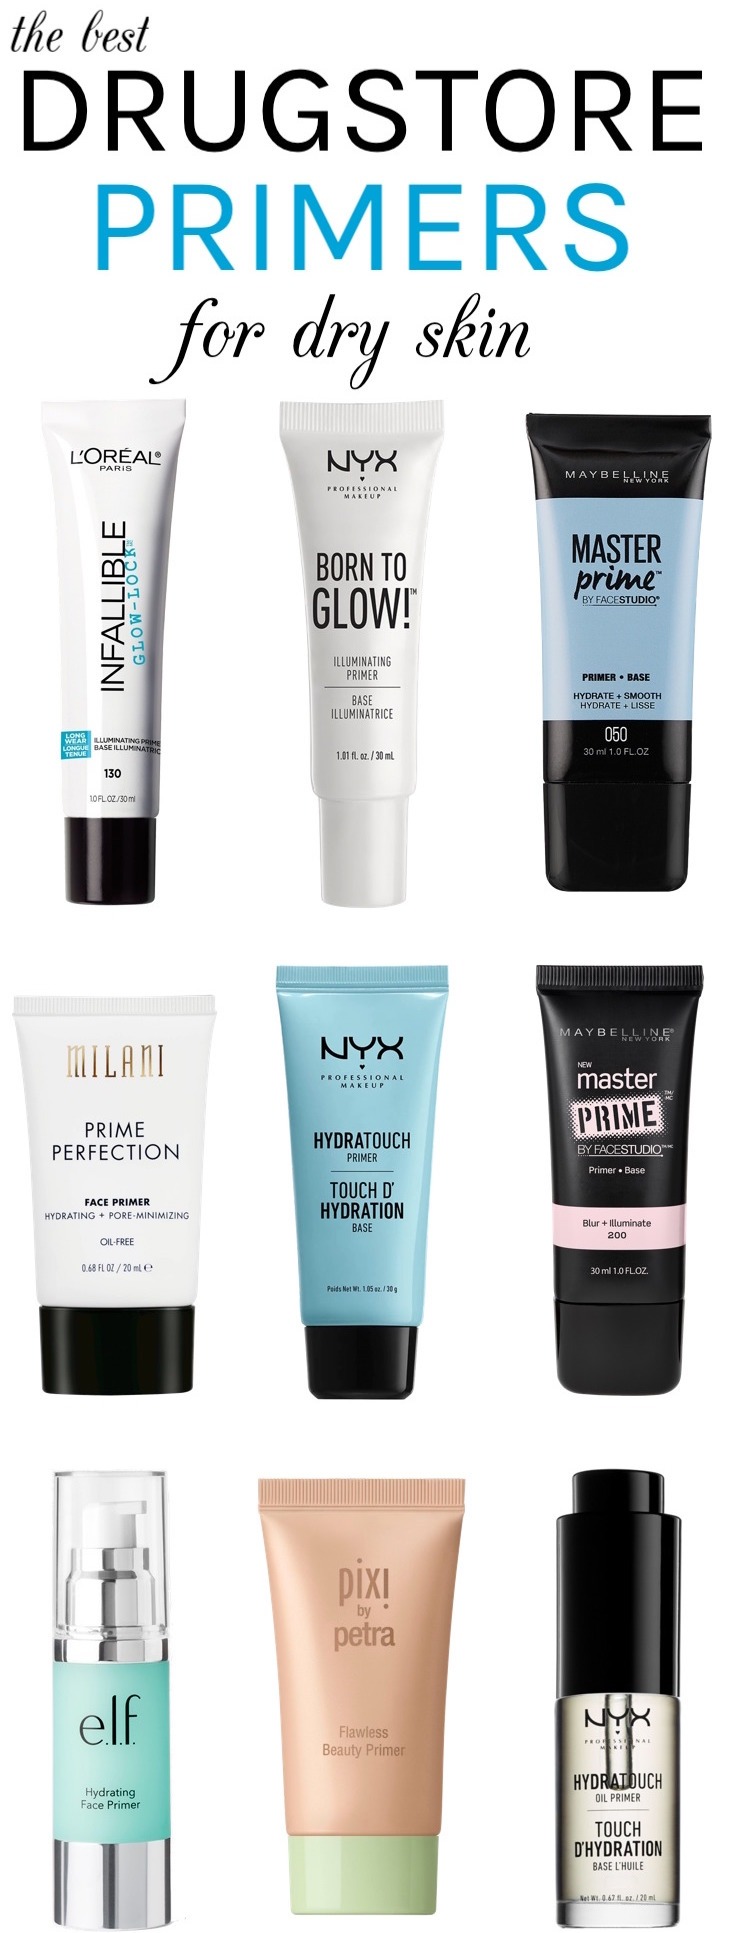 Whether you are struggling with winter dryness or a persistently dry, dull complexion, here are the best drugstore primers for dry skin you need to ace your base! These foundation primers prep your skin perfectly for makeup while packing a good hydration punch! No more flaky foundation!